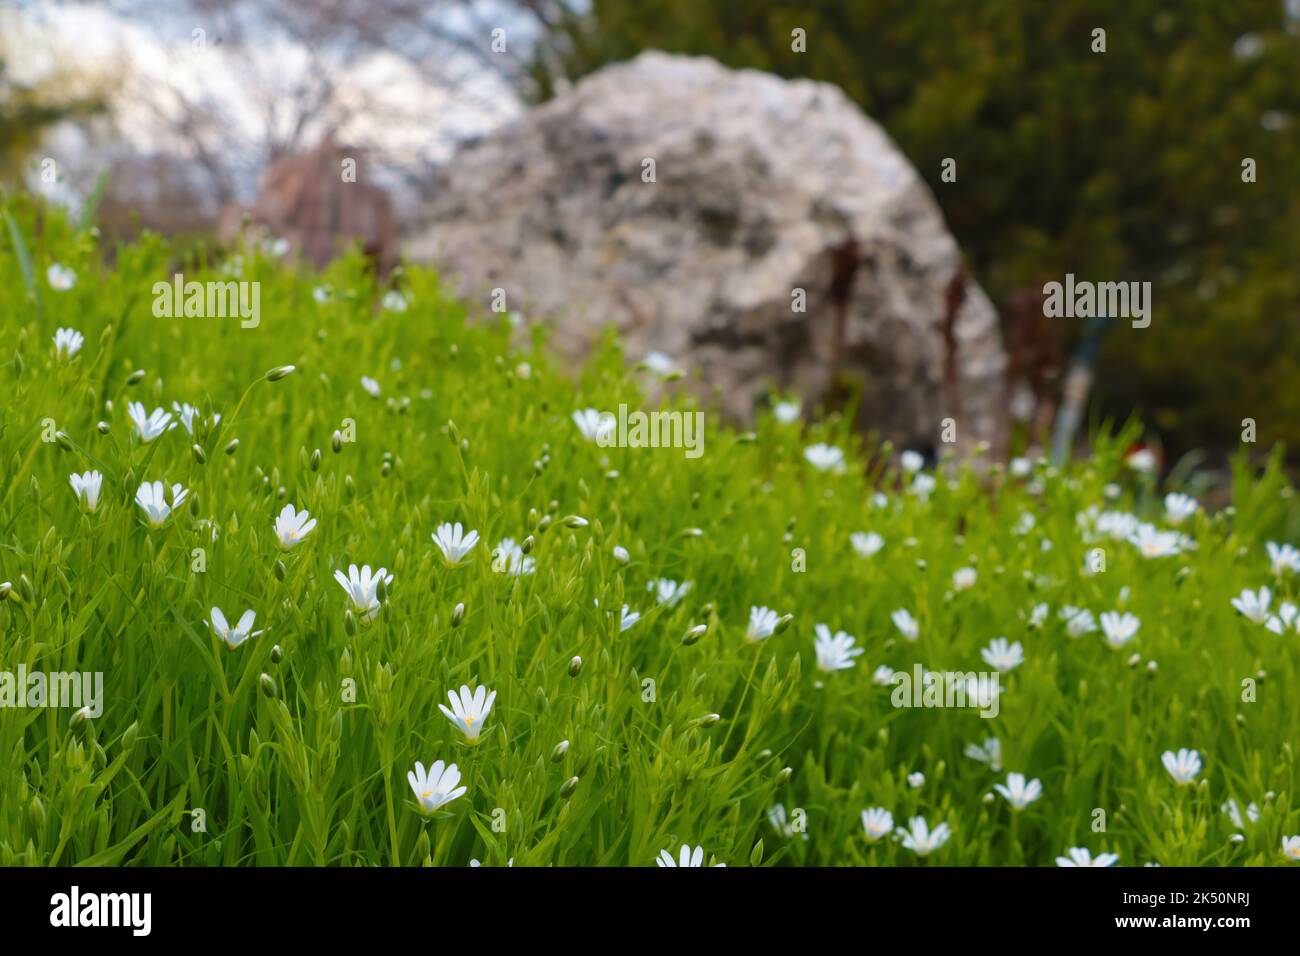 The delicate Meadow Starworts (Stellaria palustris) grown in a field with a big rock and trees in the background Stock Photo